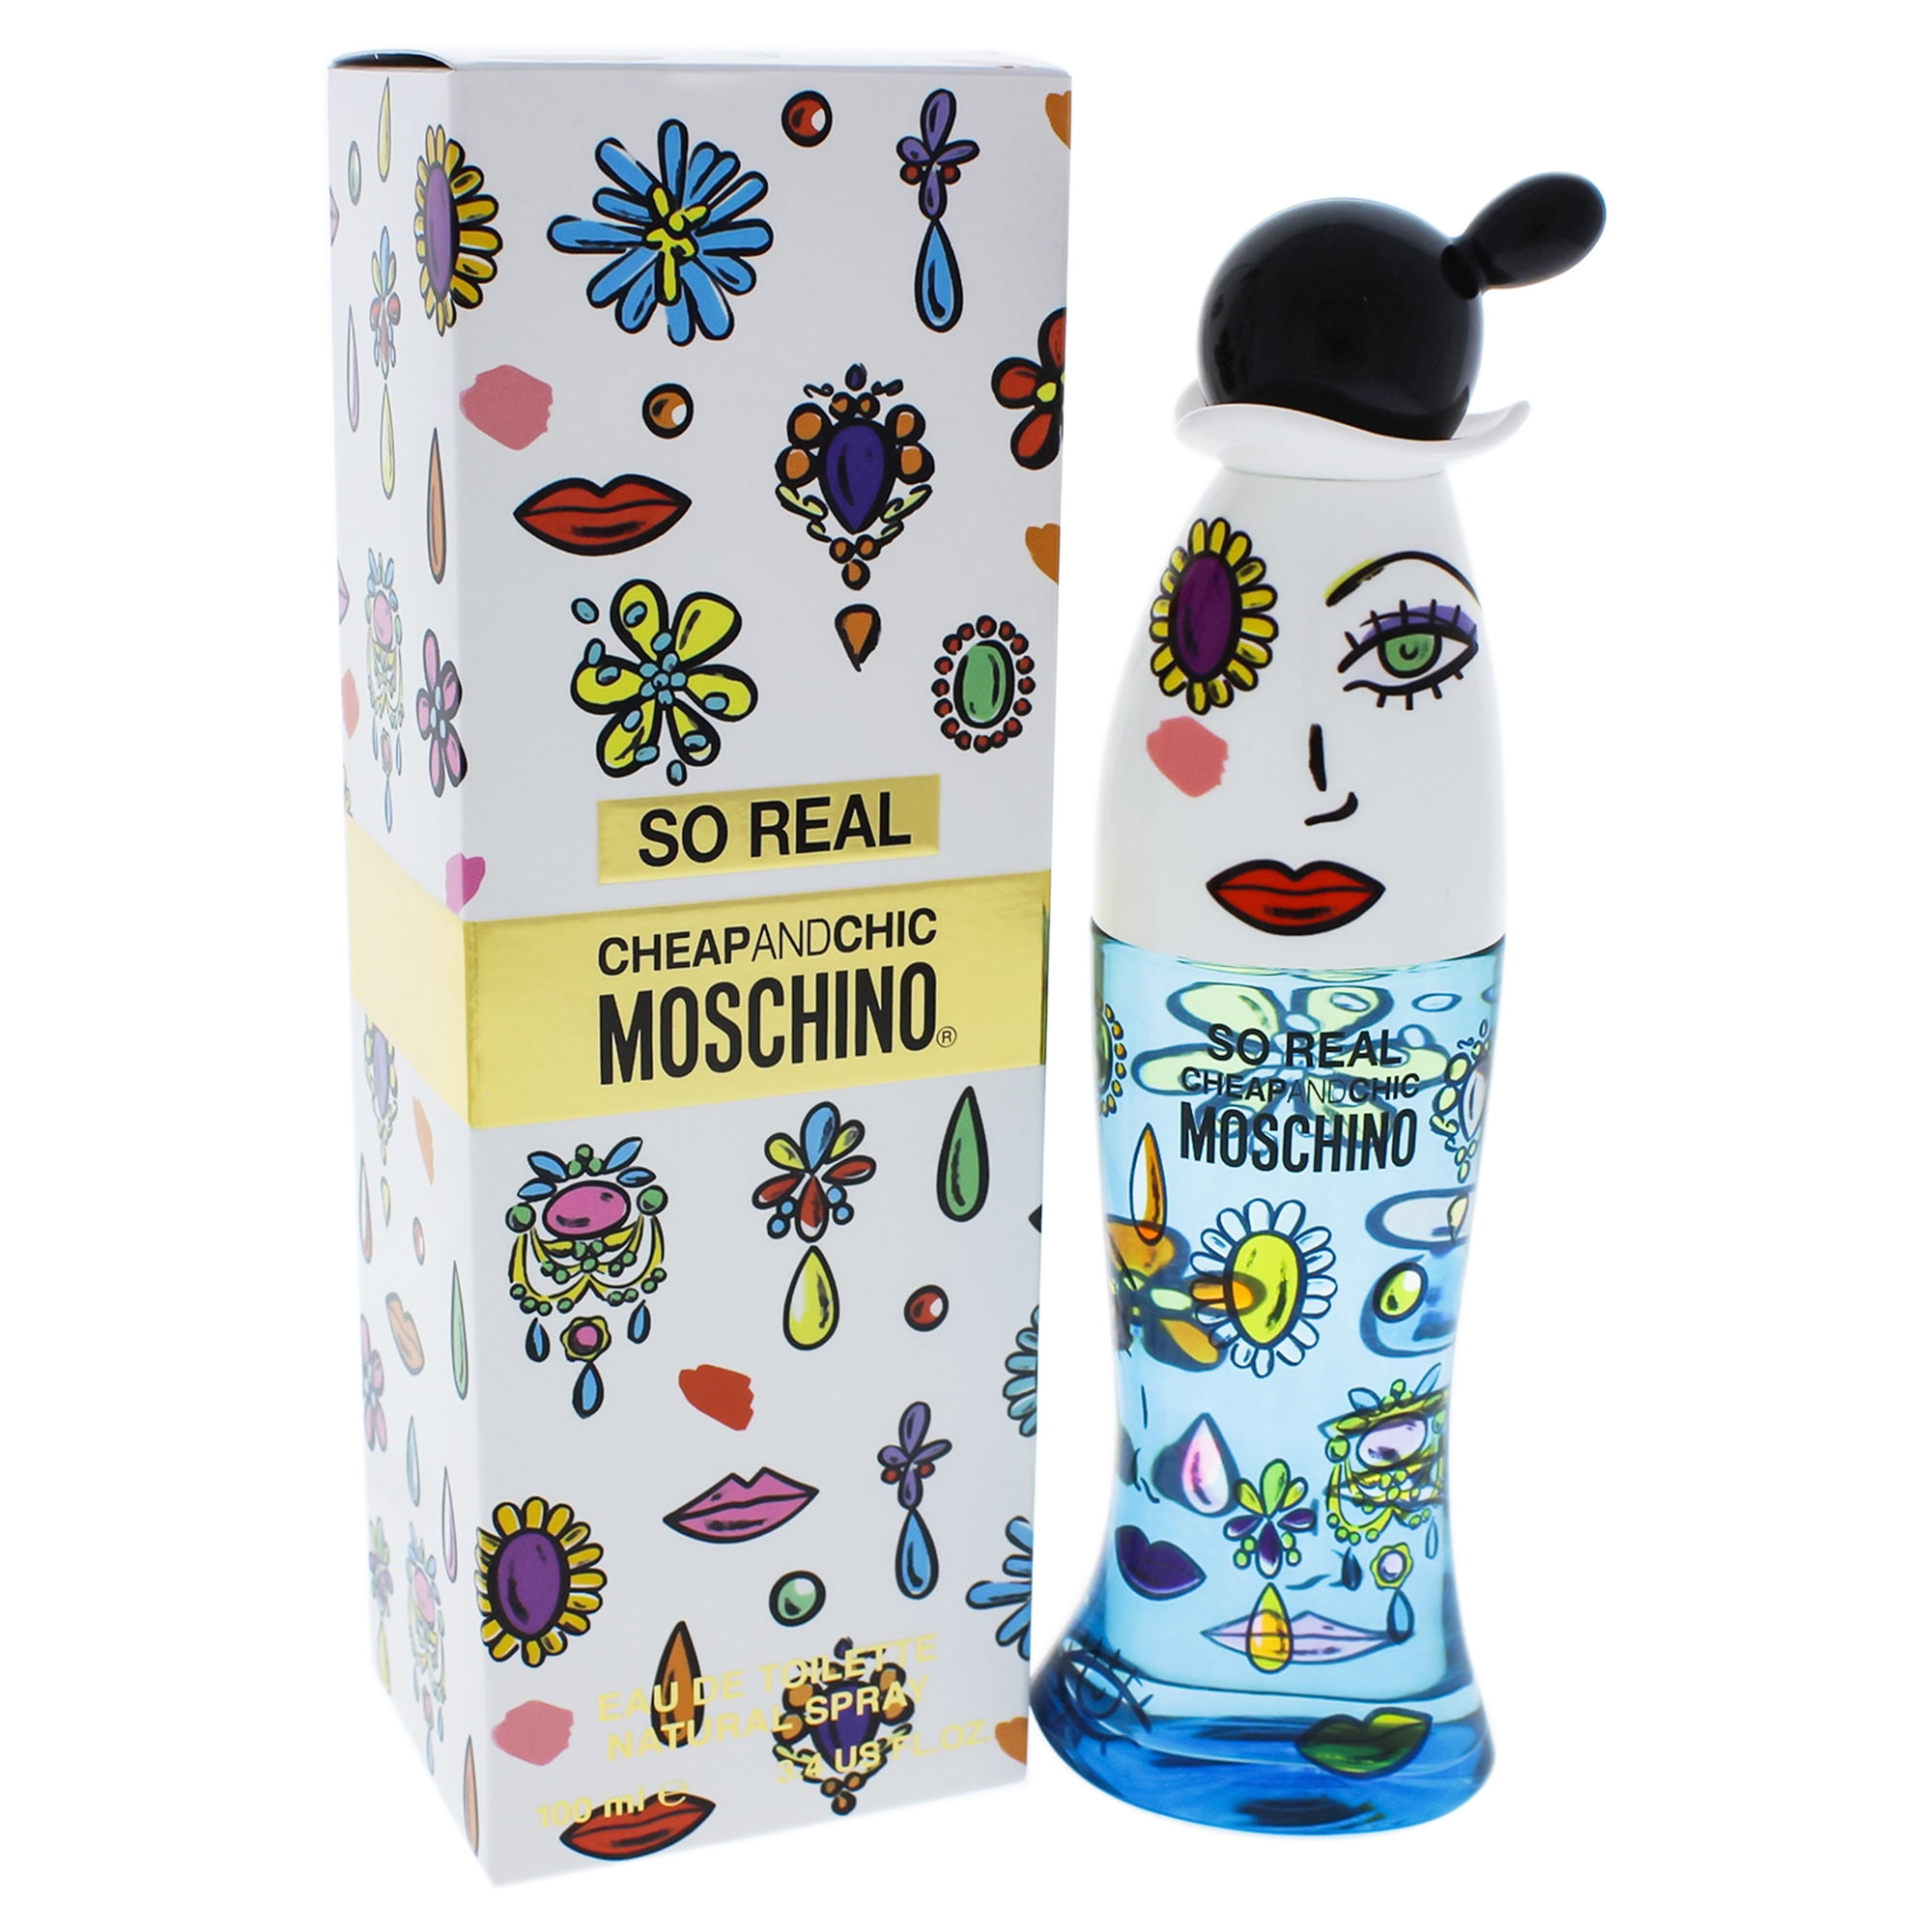 Cheap And Chic So Real by Moschino for Women - 3.4 oz EDT Spray ...